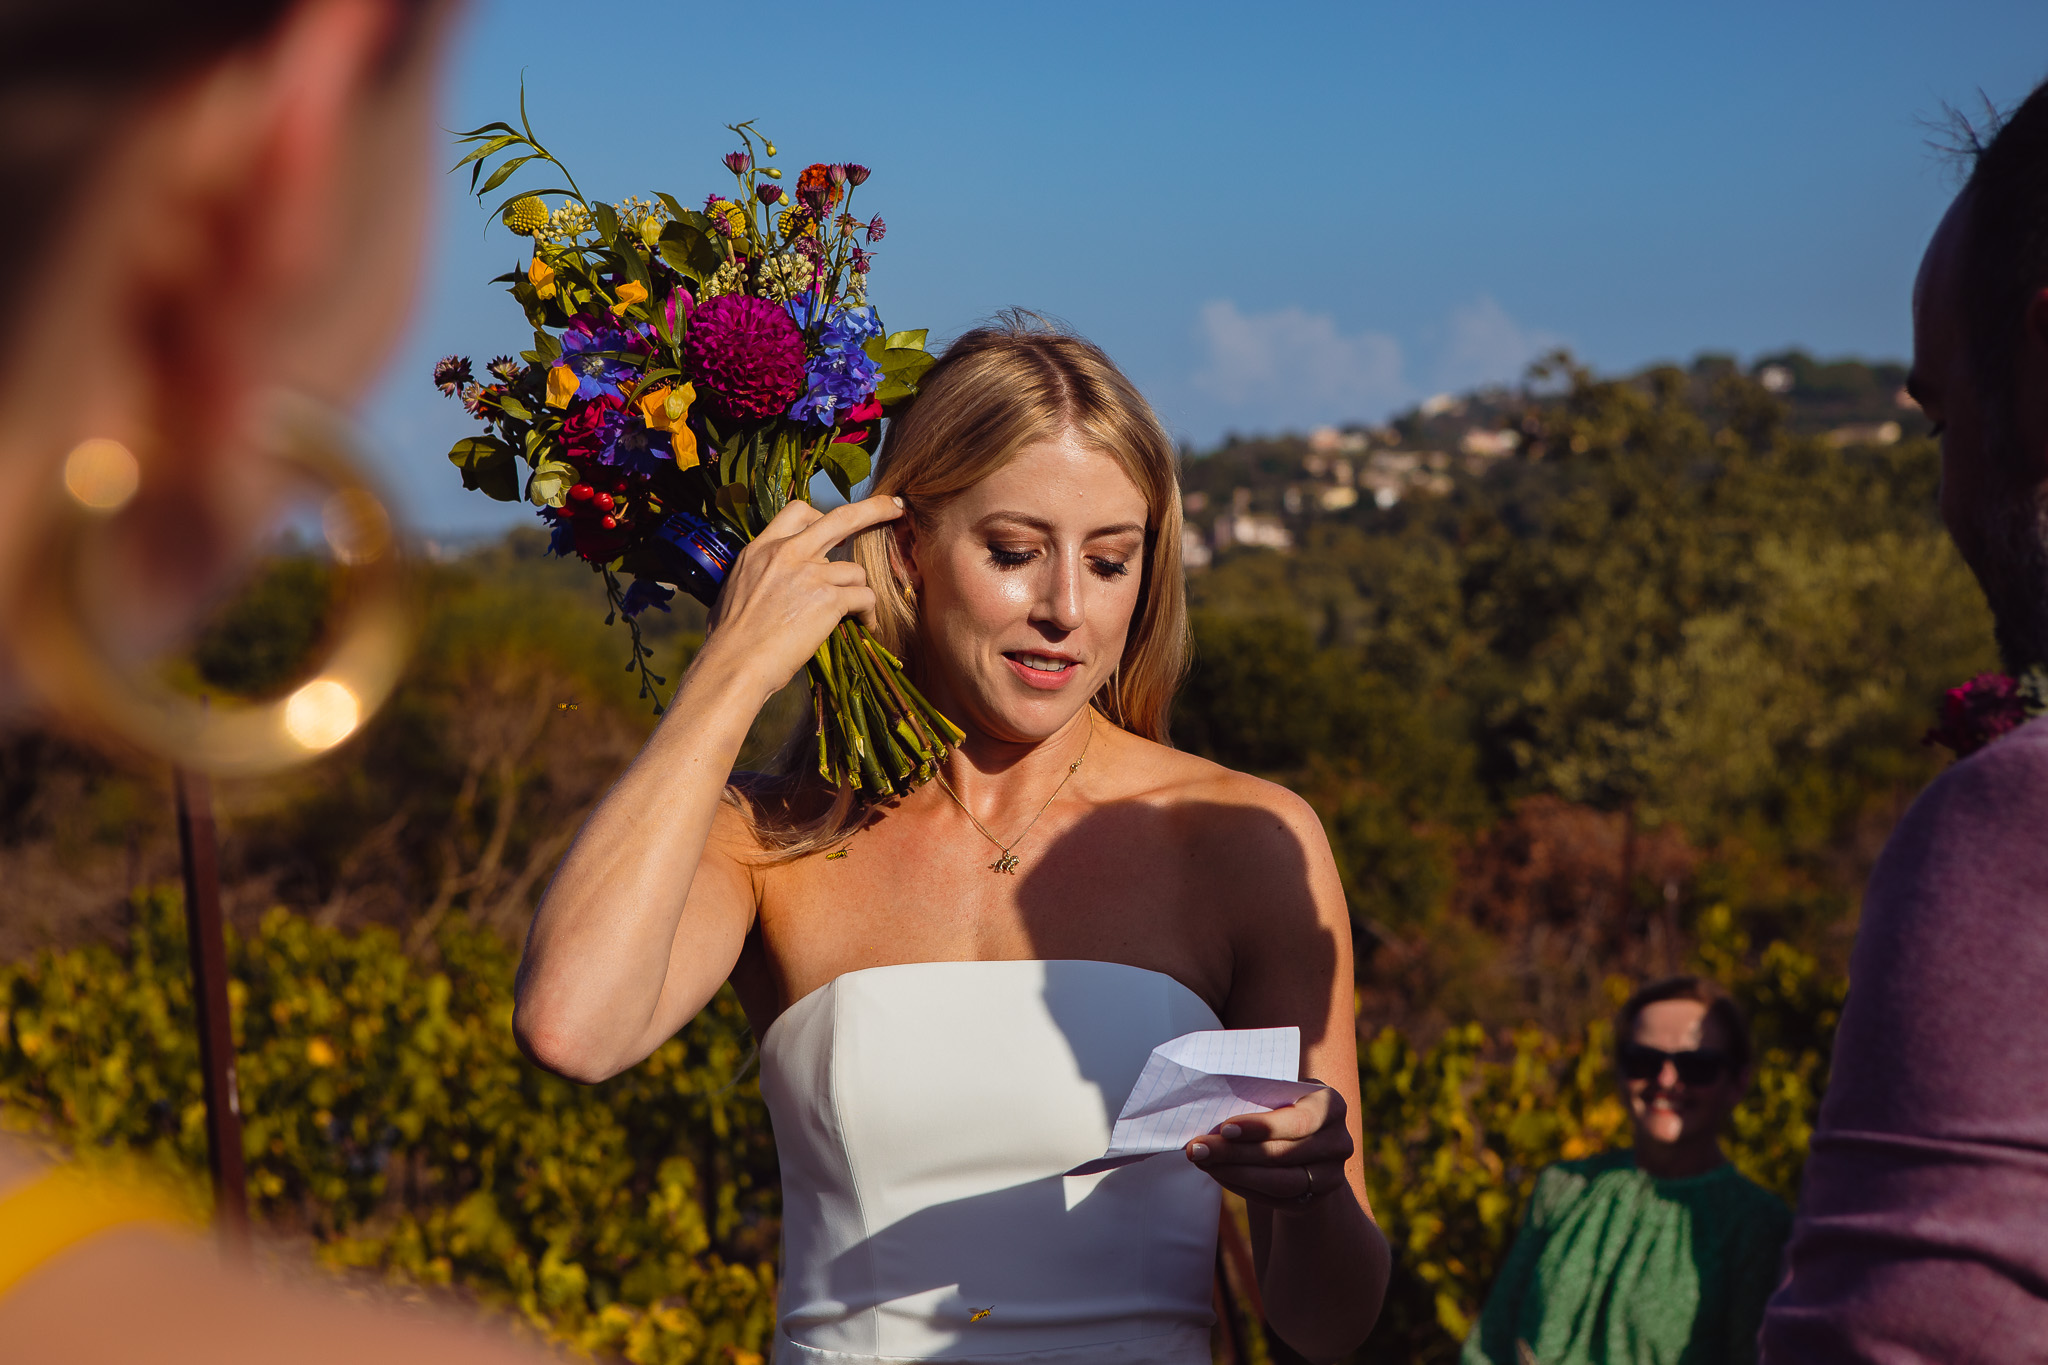 The bride reads her vows during a wedding ceremony at Ambelonas Vineyard, Corfu